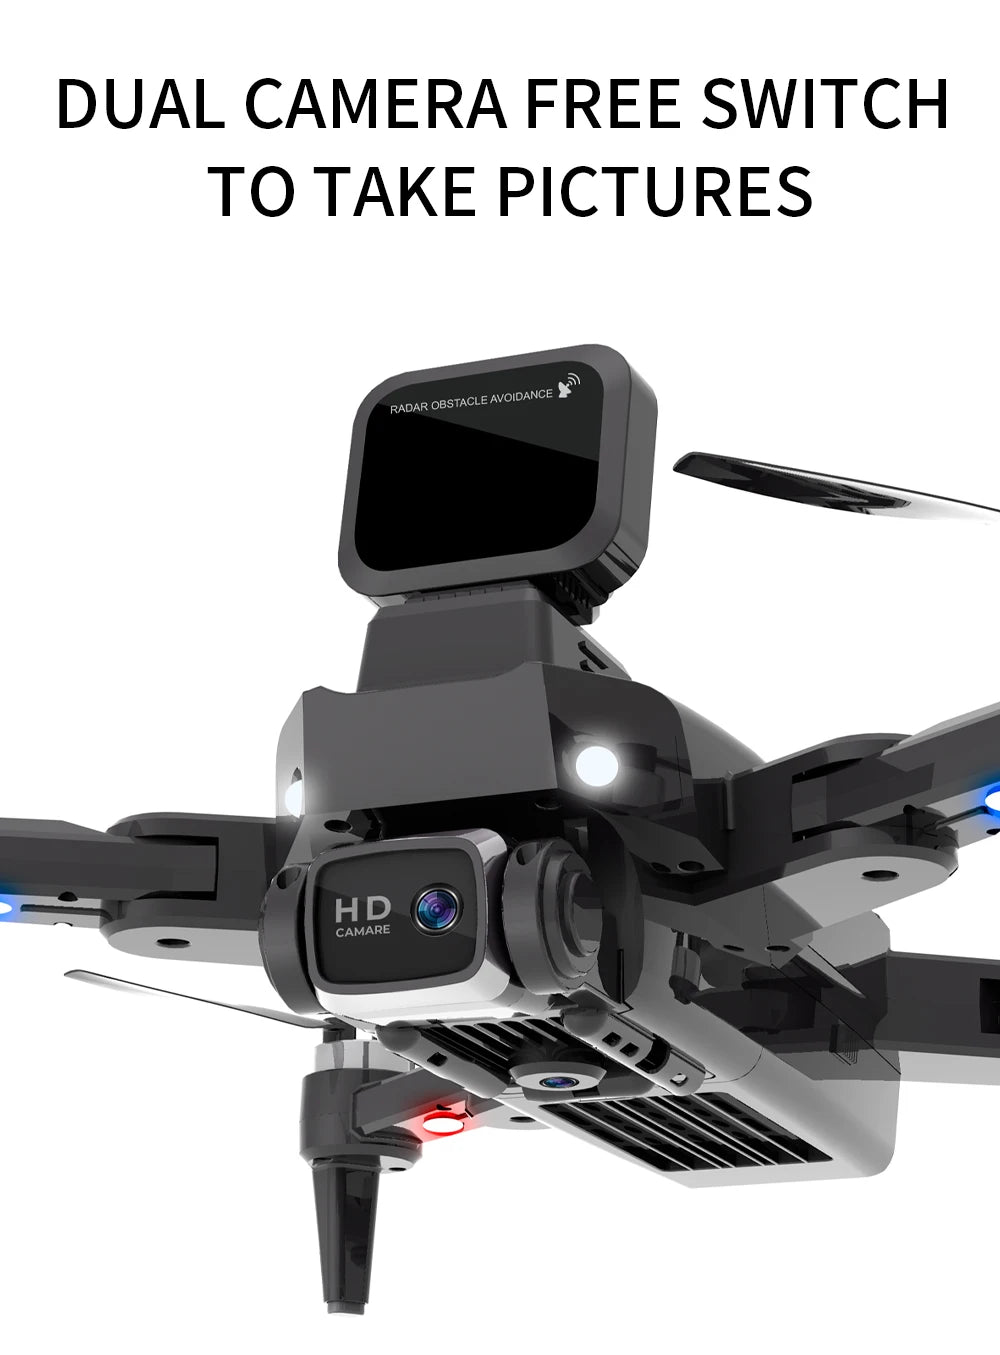 HJ40 Drone, DUAL CAMERA FREE SWITCH TO TAKE PICTURES RADAR